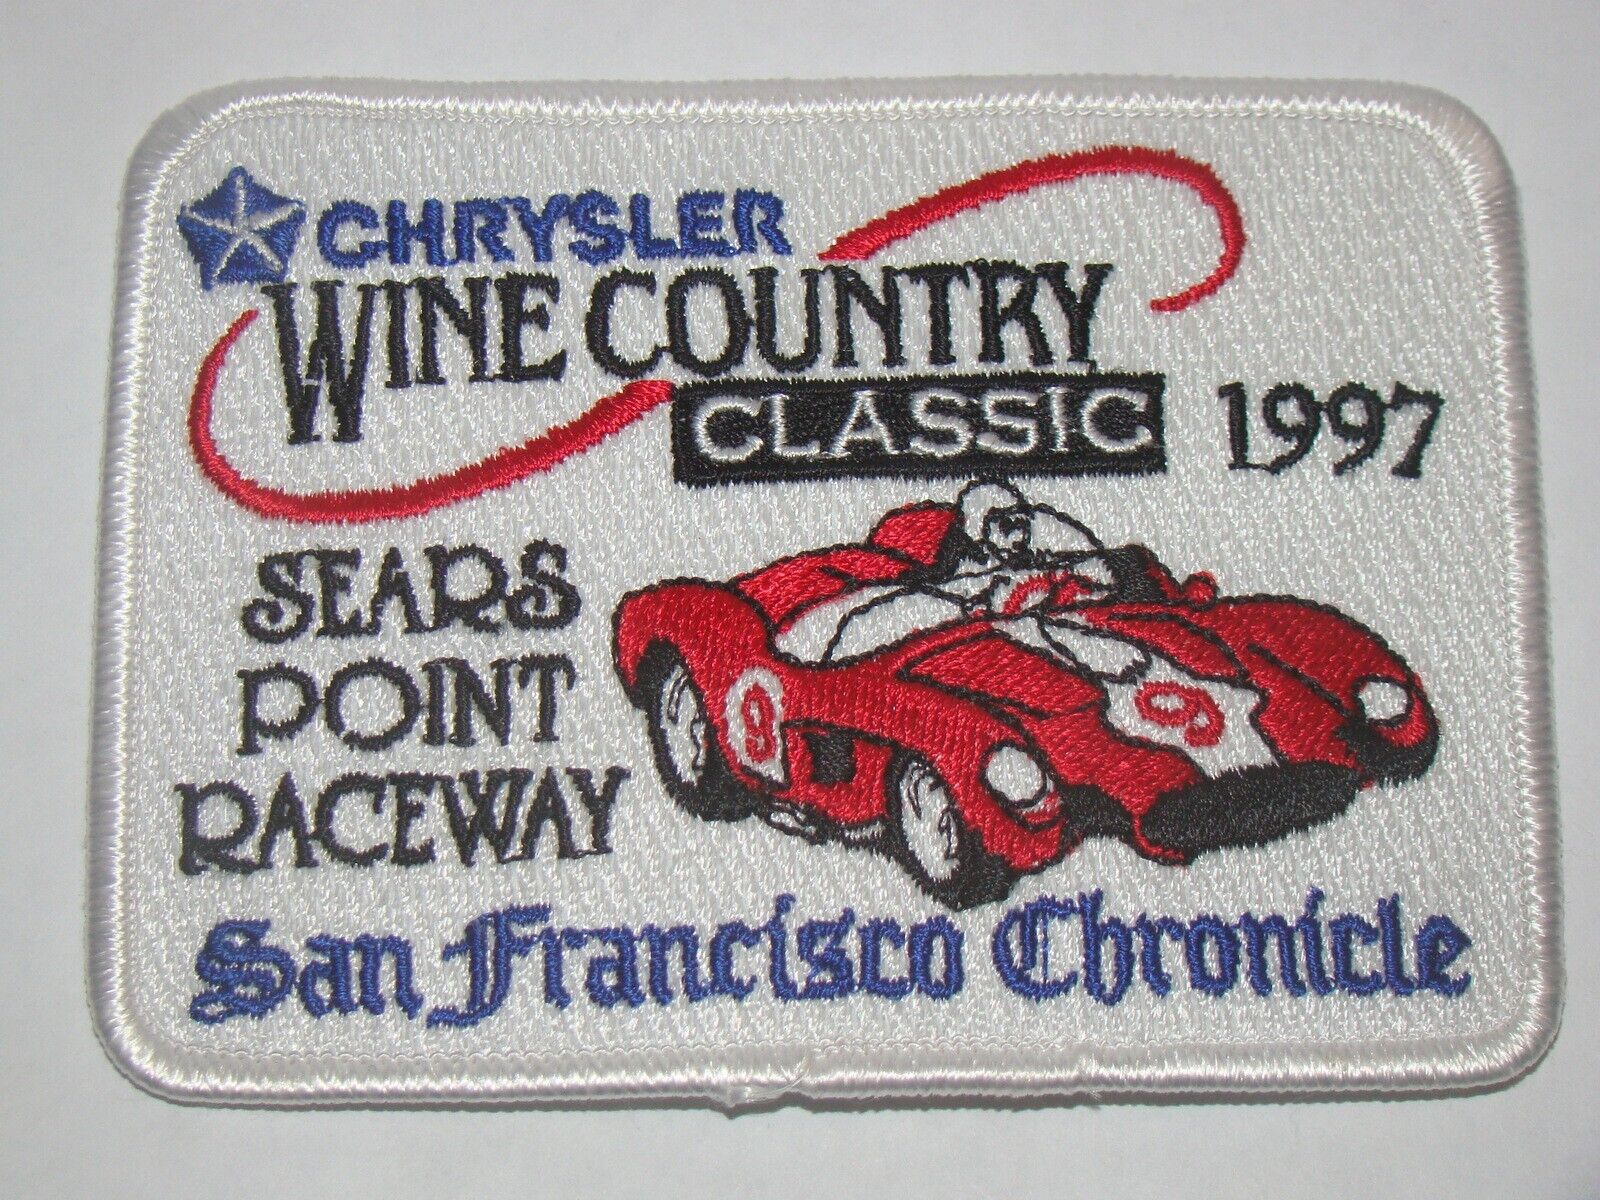 CHRYSLER WINE COUNTRY CLASSIC (1997) SEARS POINT RACEWAY SF Chronicle Patch